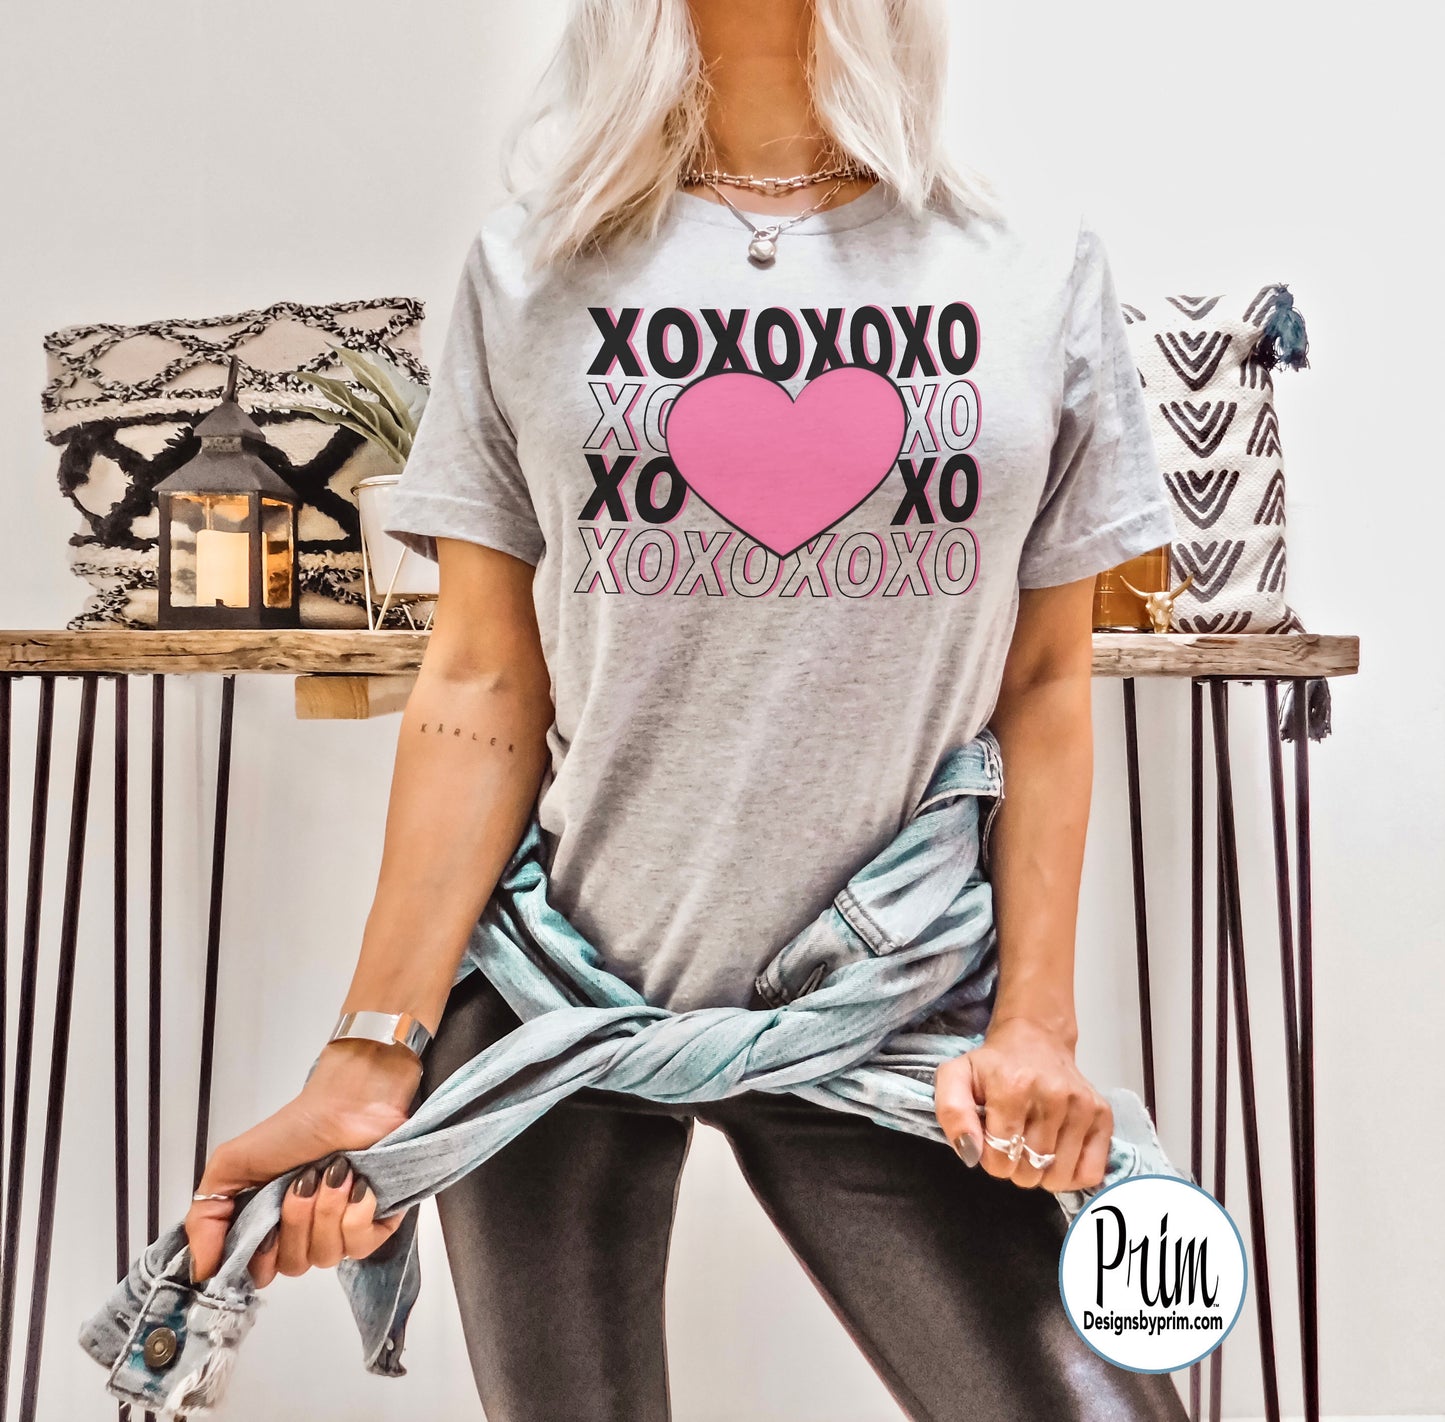 Designs by Prim XOXO Heart Soft Unisex T-Shirt | Hugs and Kisses Valentines Day Share the Love All You Need Is Love Valentine's Top Lovers Hippie Groovy Tee